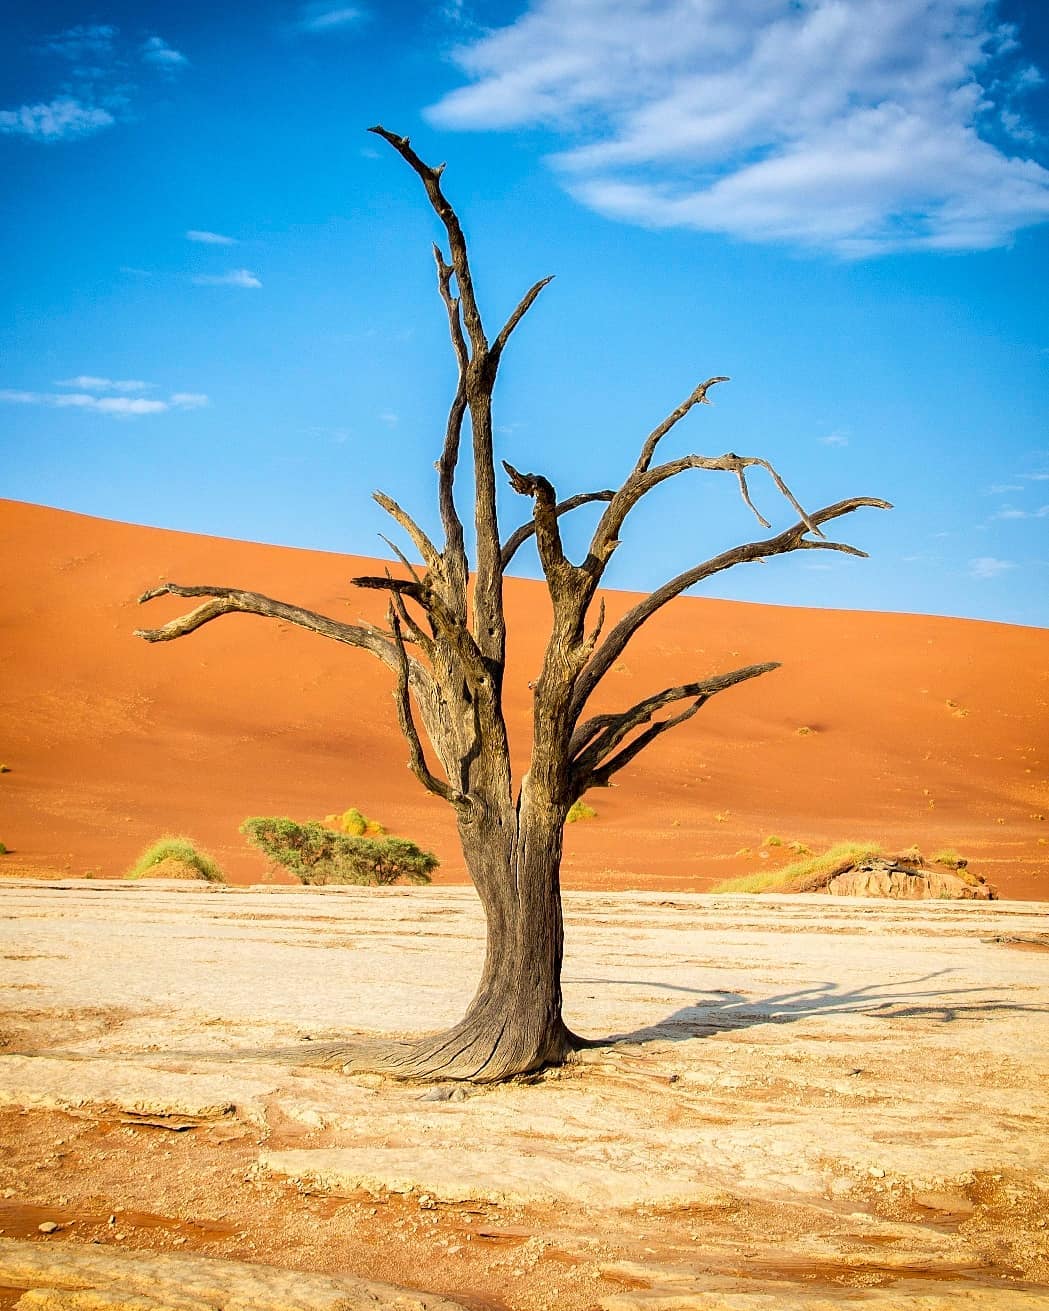 #Sossusvlei in #Namibia was one of those destinations that completely lived up to the image we had in our minds. Sossusvlei, and its iconic neighbour #Deadvlei, were every bit as sensational as I had hoped.⠀
⠀
Vlei is Afrikaans for ‘marsh’, while ‘sossus’ is Nama for ‘no return’ or ‘dead end’. Needless to say, it is a harsh environment! ⠀
⠀
We were visiting Deadvlei and Sossusvlei on a 17-day self-drive #safari through Namibia with @WildDogSafaris. ⠀
-⠀
-⠀
-⠀
-⠀
-⠀
-⠀
-⠀
#exploringnamibia #Namibia🇳🇦 #deadvleinamibia #Namibia #seenamibia #namibiadesert #namibiatravel #namibiatourism #dunes #travelnamibia #sharemynamibia #thisisnamibia #namibia_africa #lpPathfinders #rgphoto #BBCTravel #lonelyplanet